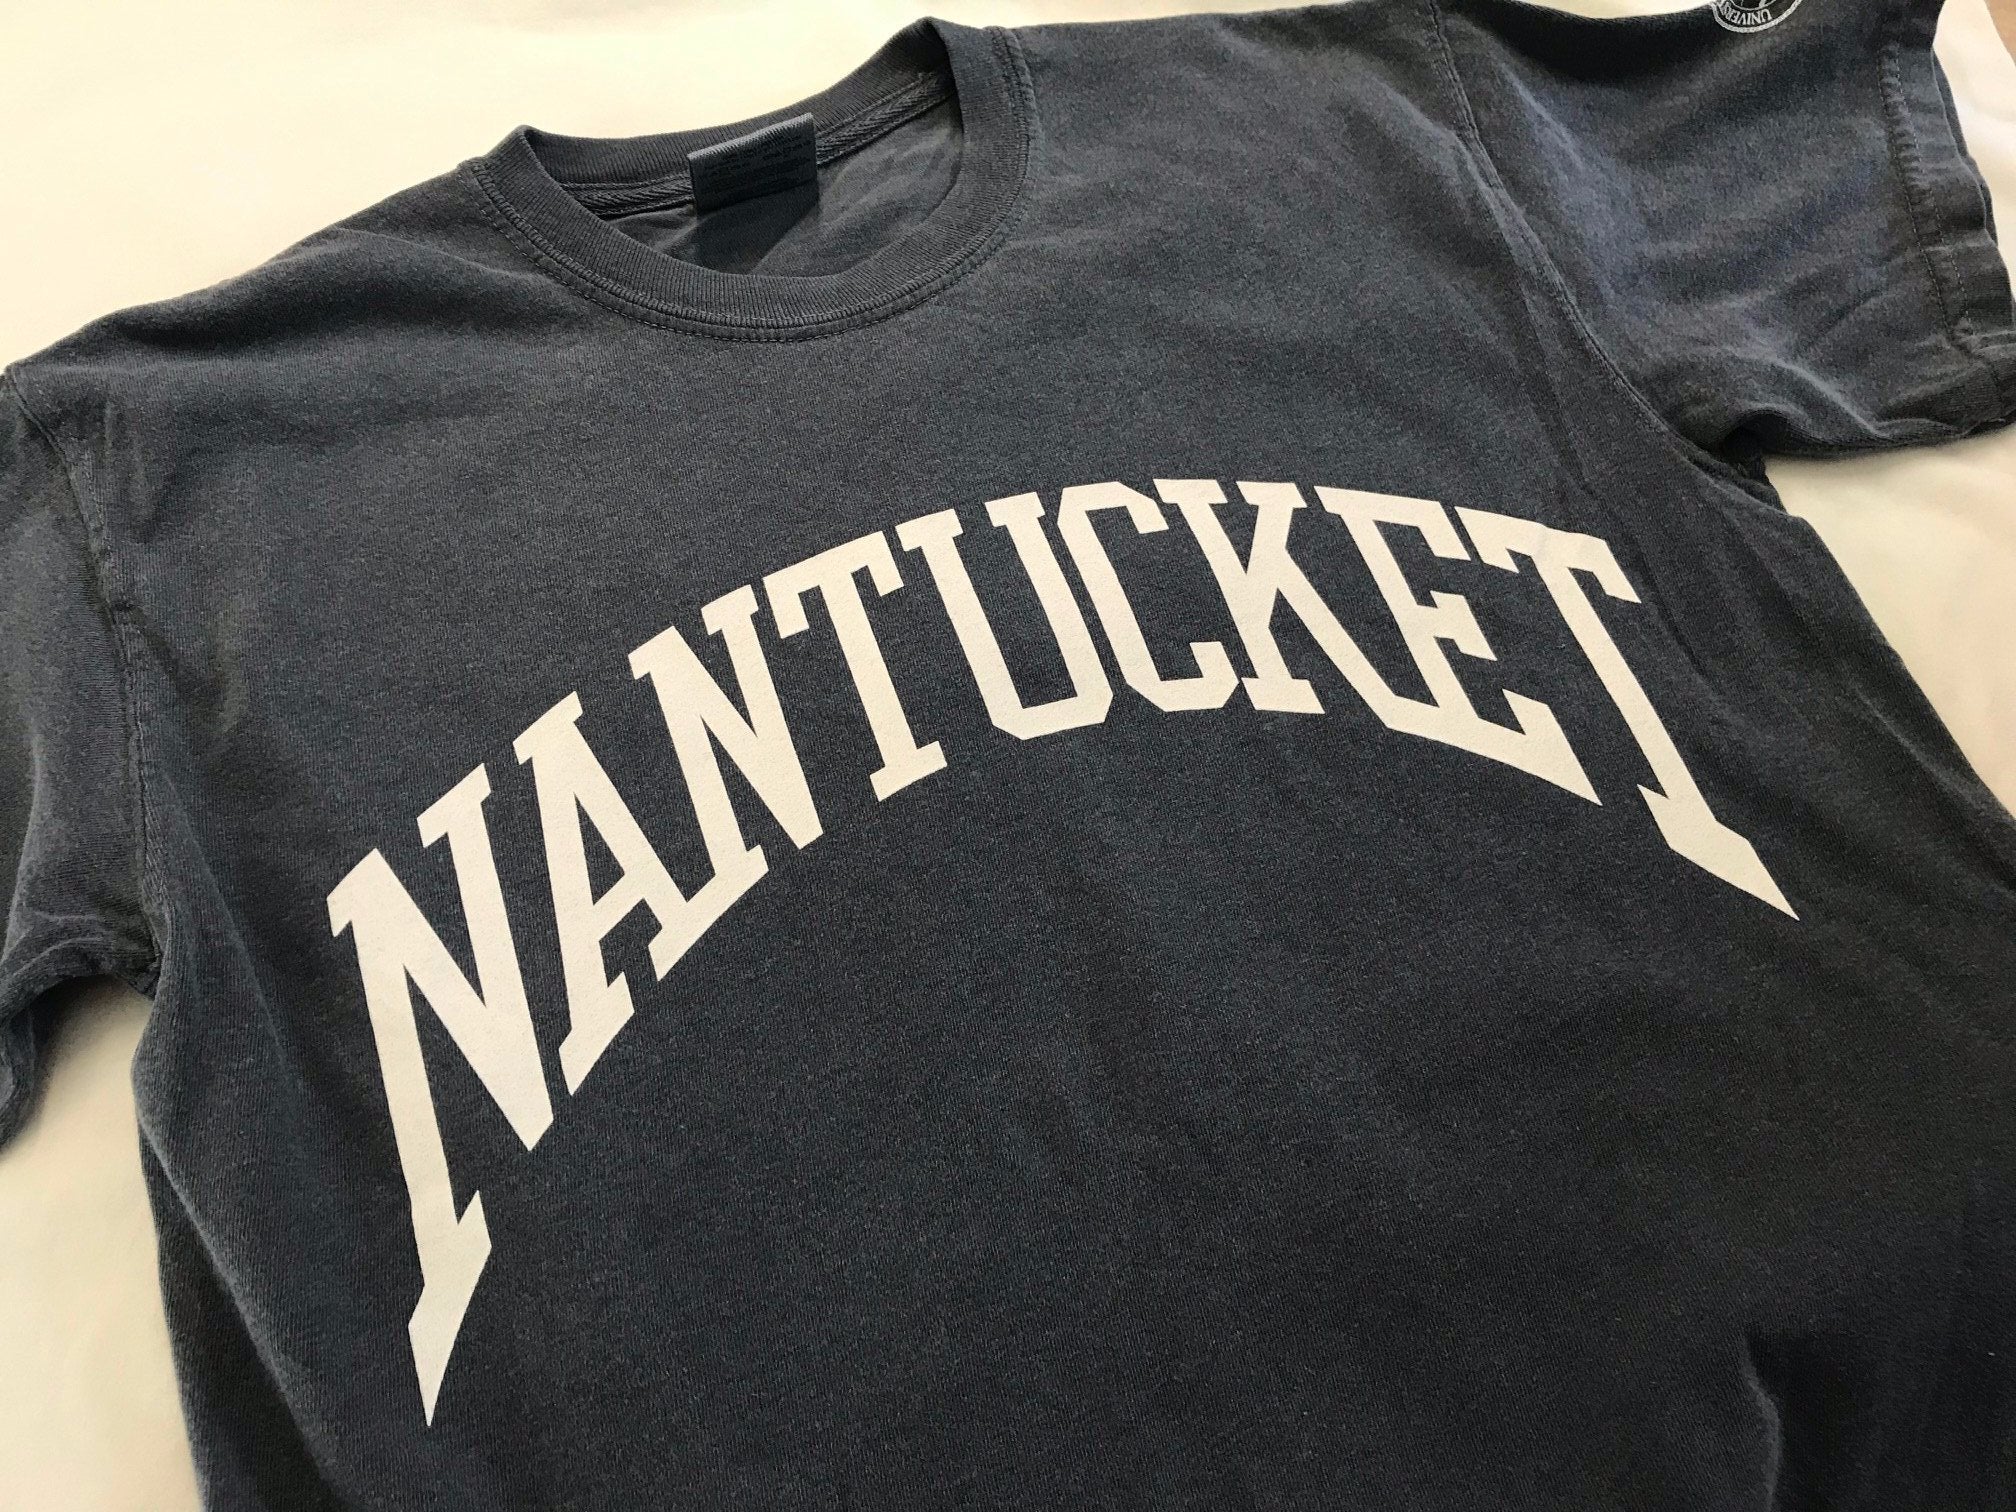 Nantucket Arch tee by Comfort Colors in Island Red